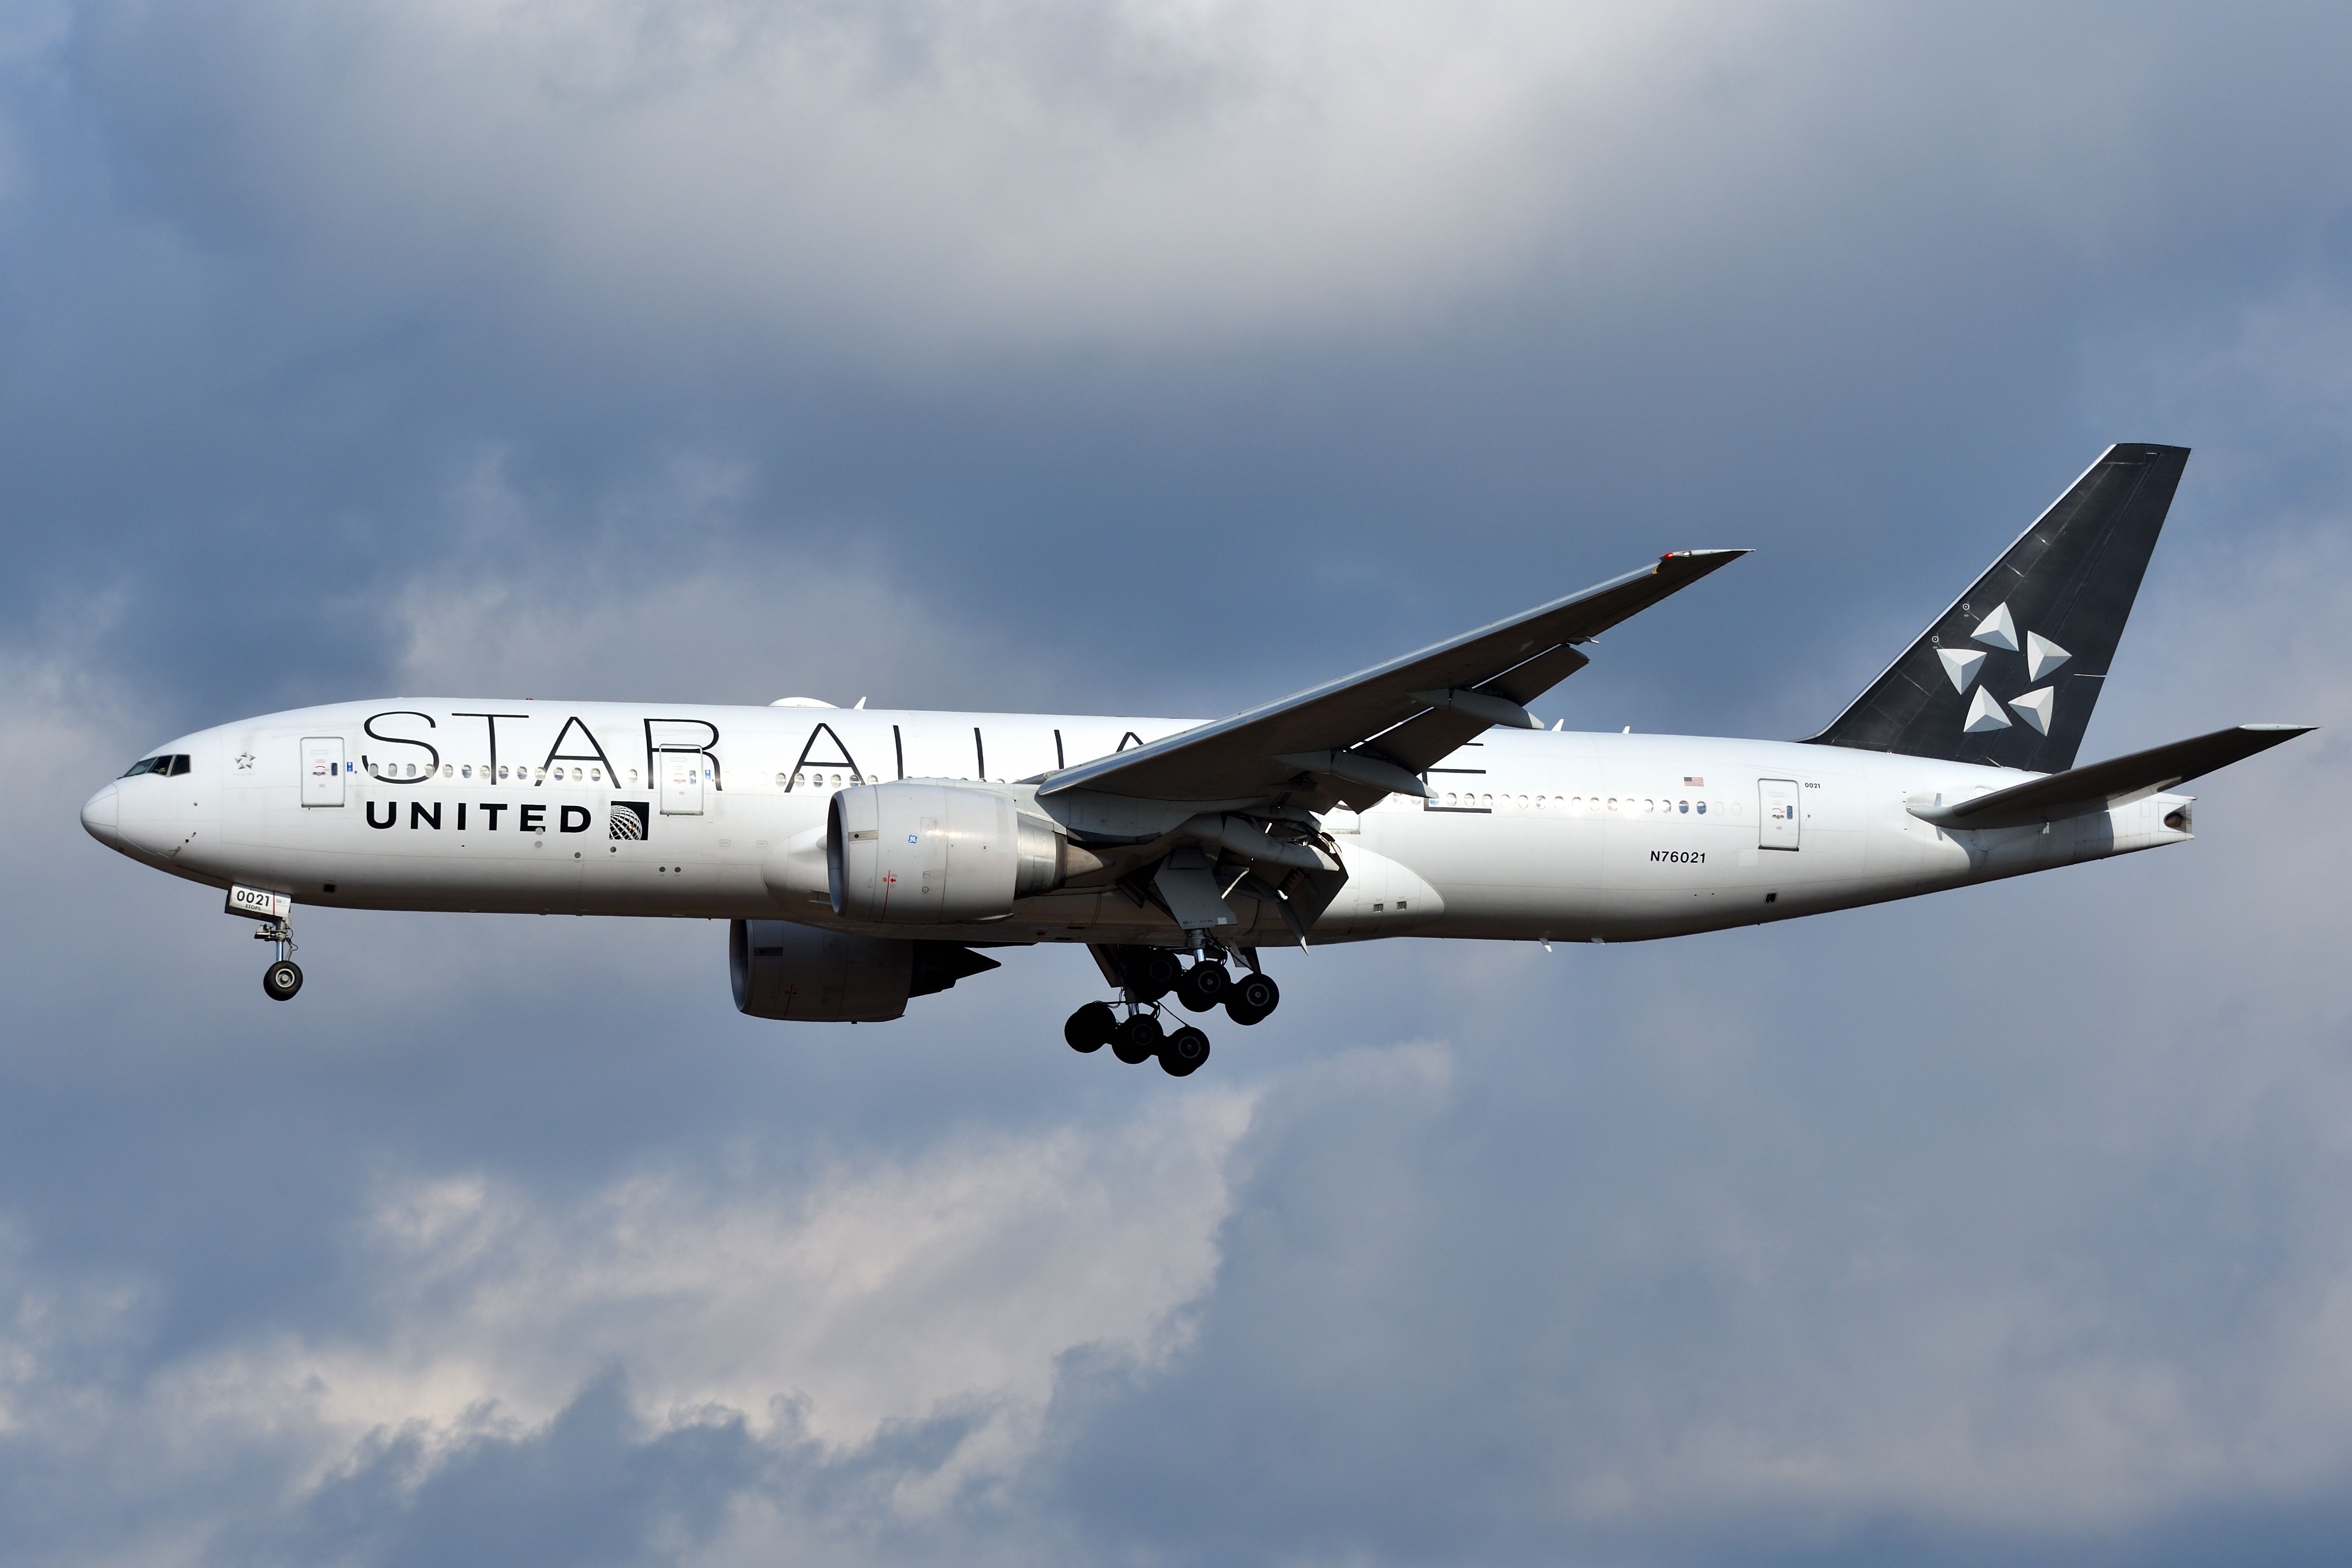 A United Airlines aircraft with a Star Alliance livery 